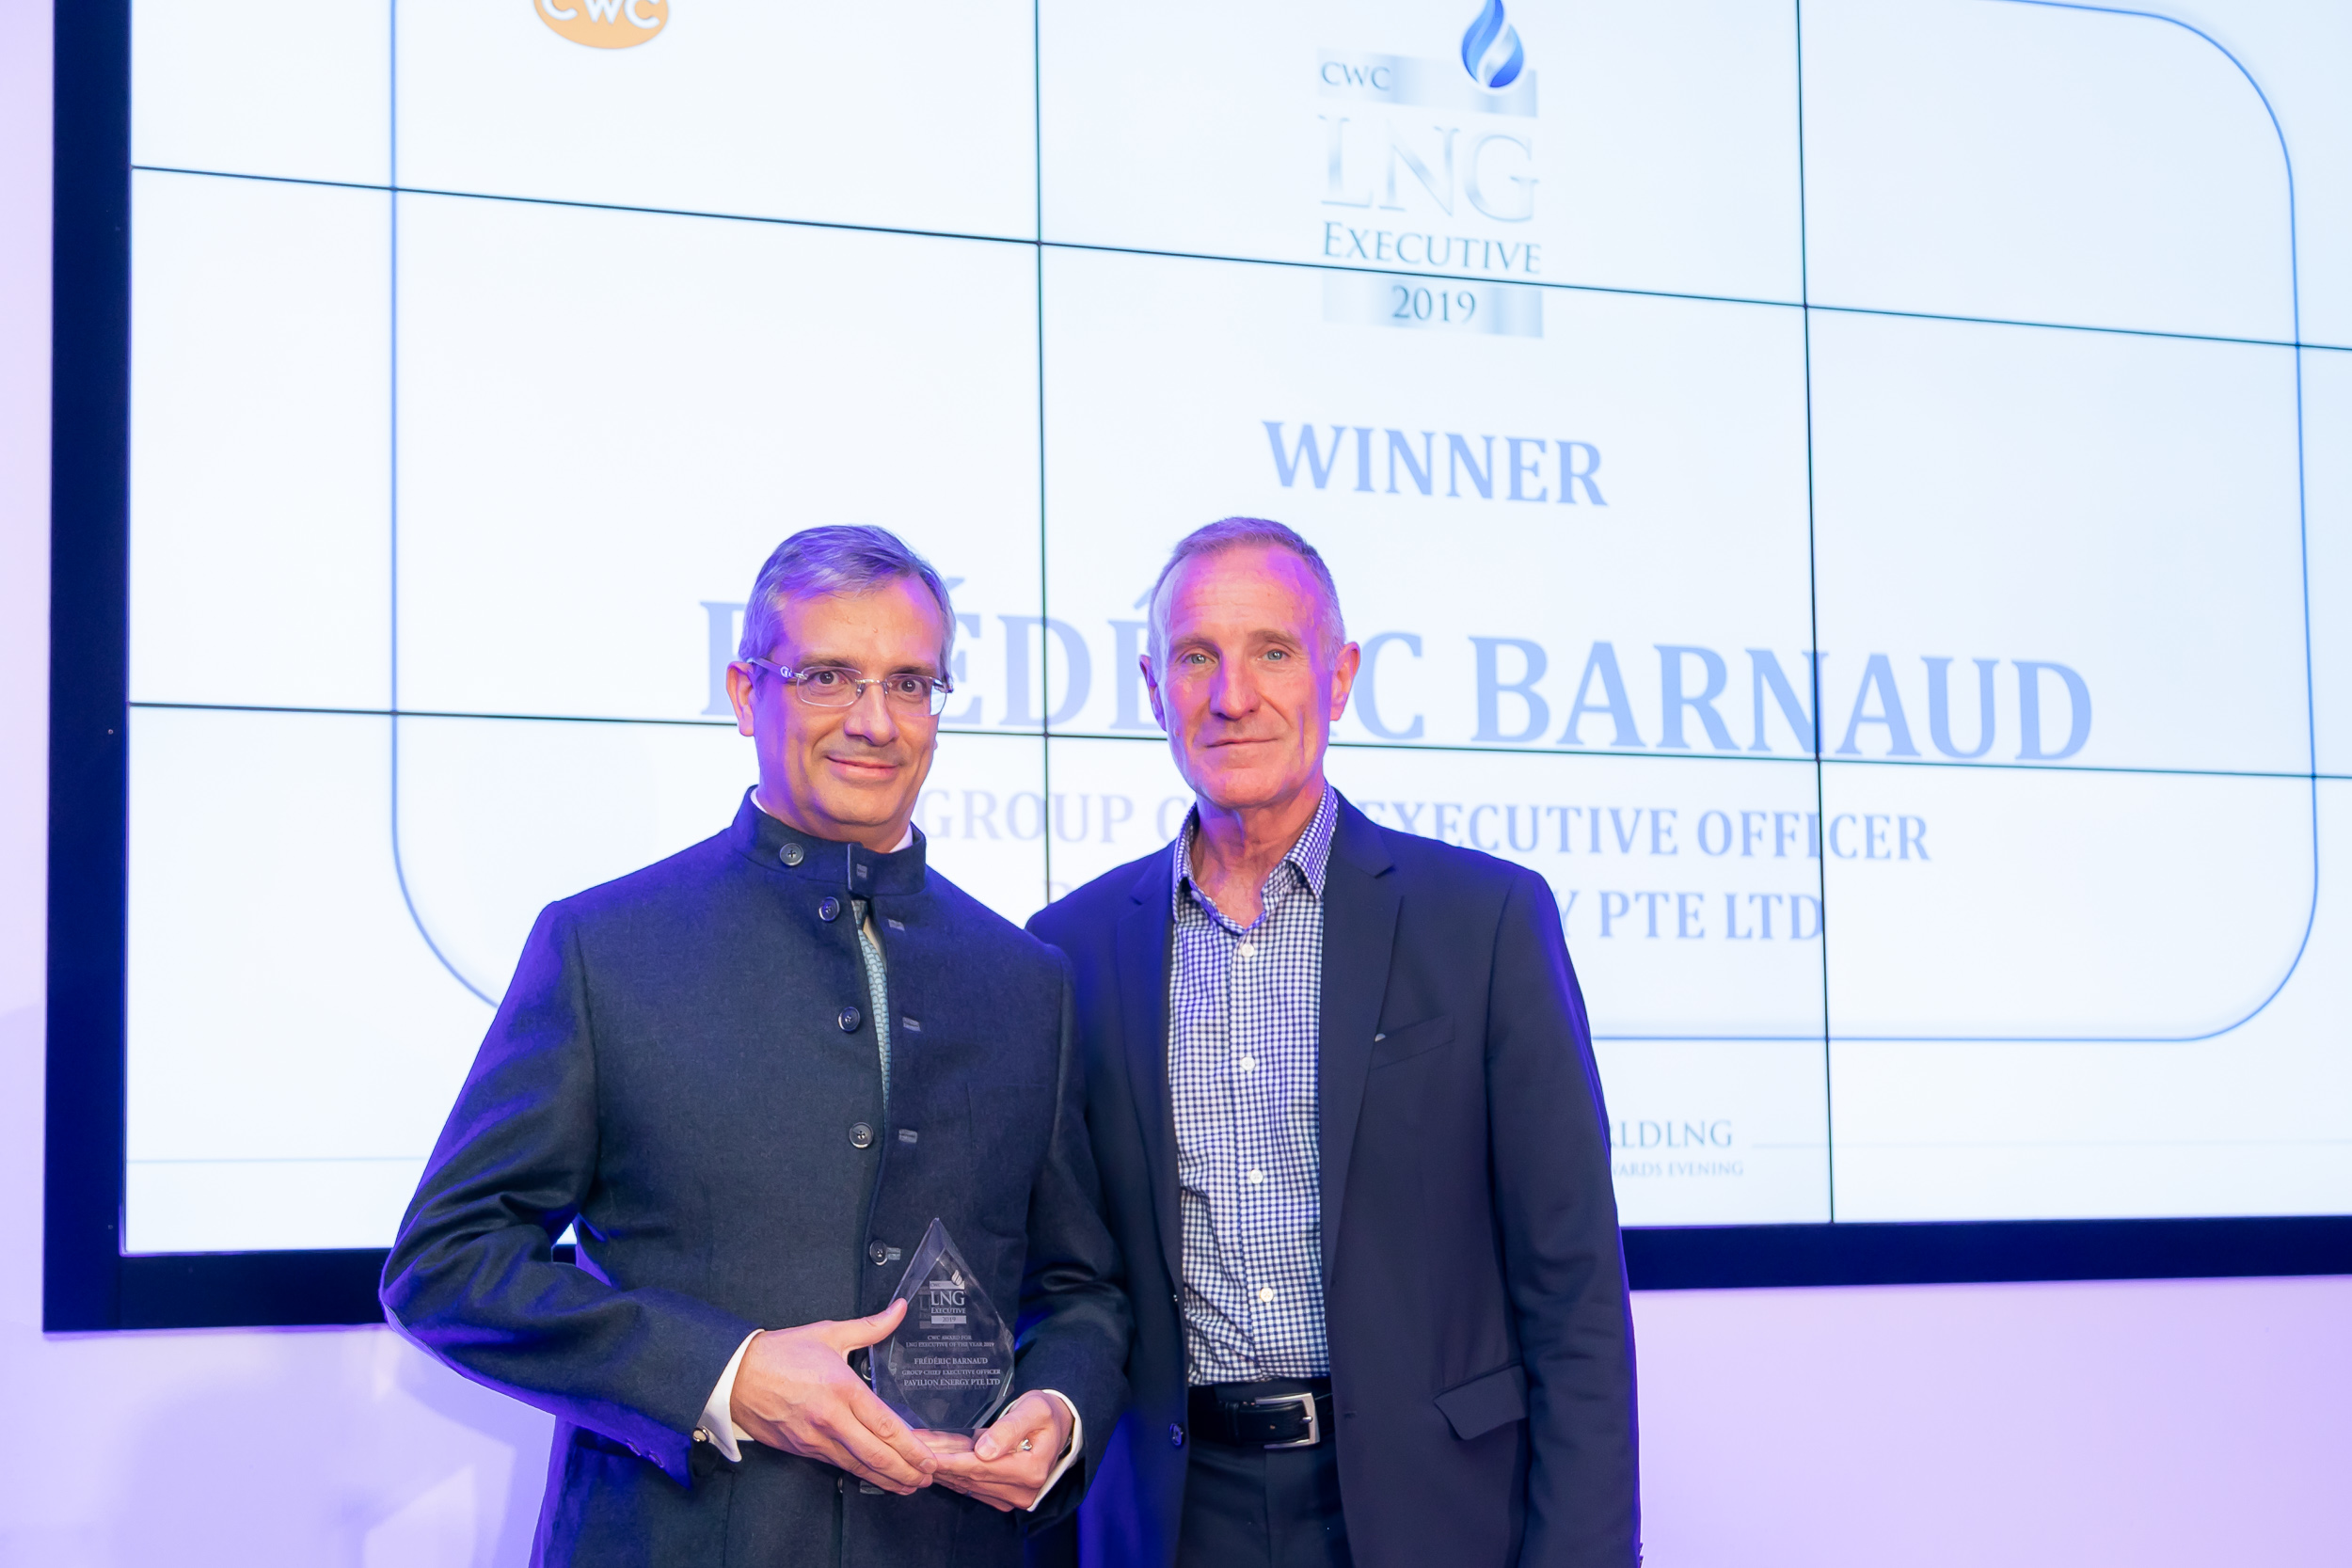 (L to R) Mr Frédéric H. Barnaud, Group CEO of Pavilion Energy and Mr Mark Gyetvay, Chief Financial Officer of NOVATEK. Frédéric accepted the award from Mr Gyetvay, who had received the 2018 CWC Executive of the Year award on behalf of 2018 winner, Mr Leonid Mikhelson, Chairman of Management Board, NOVATEK.